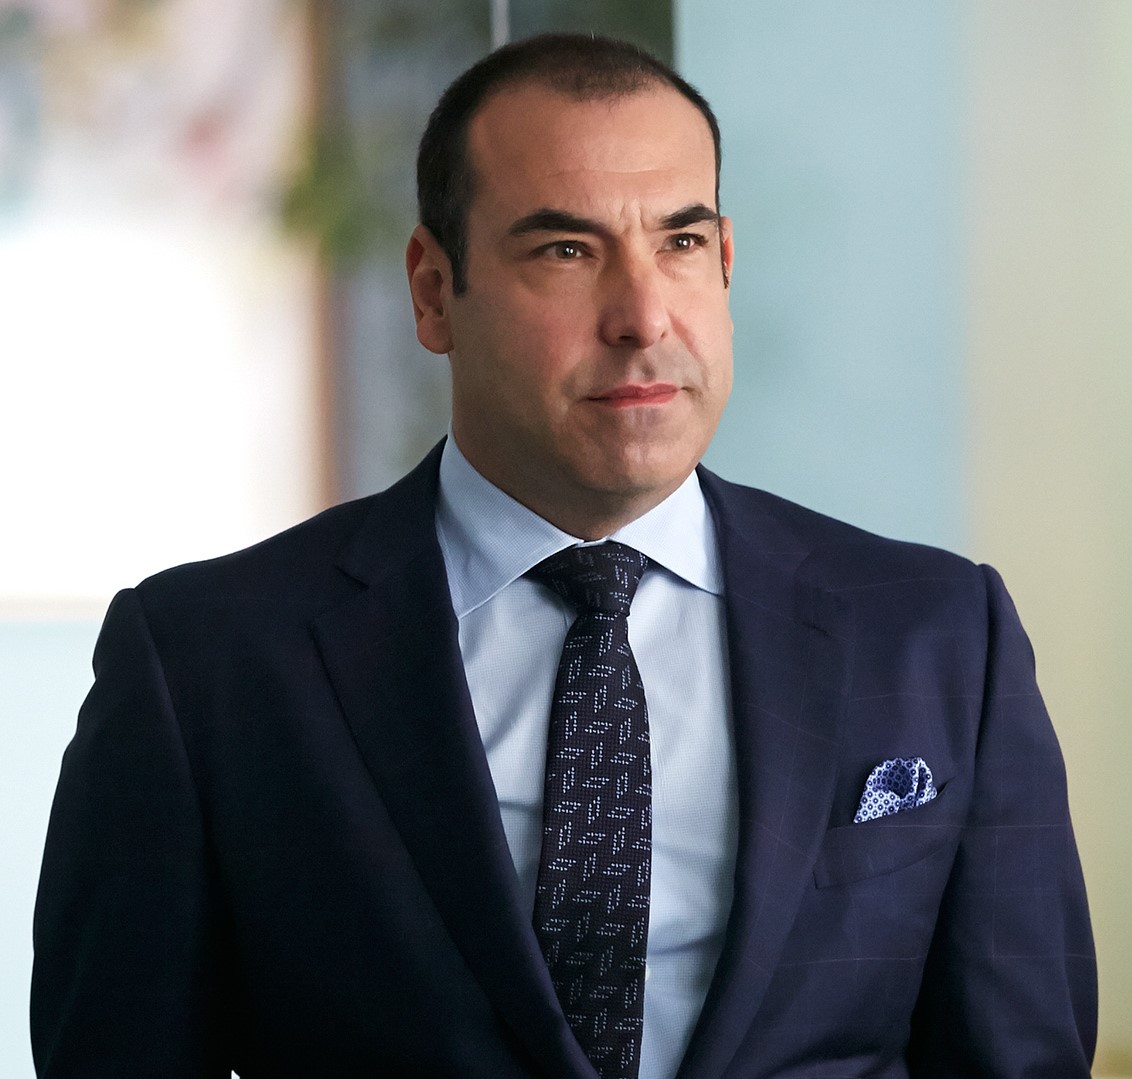 Who Plays Louis Litt On Suits